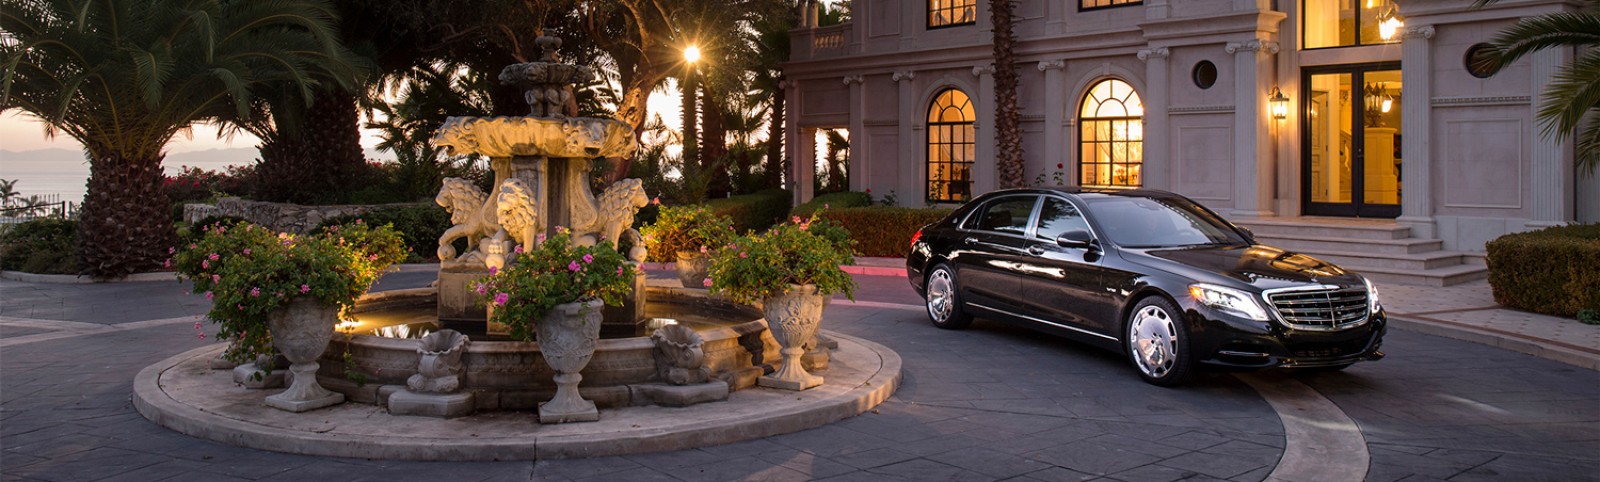 Private Chauffeur for Rolex Monte Carlo Masters - Premium Vehicles & Services - Reactivity 24/7 - Ruby Services - Car Rental with Driver for Rolex Monte Carlo Masters